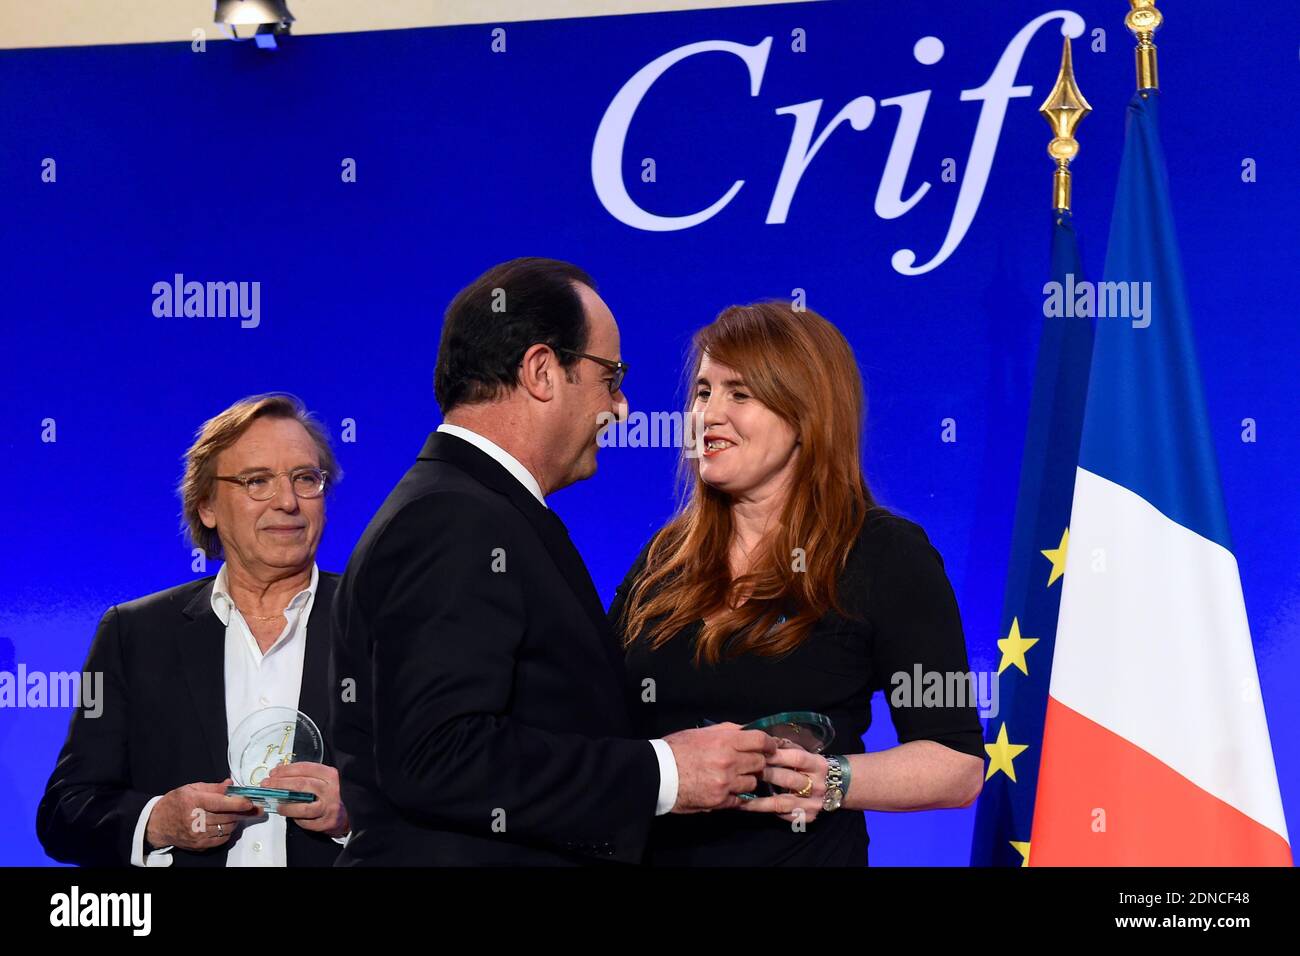 French President Francois Hollande presents producer Marie-Castille Mention-Schaar with a CRIF award as director Alexander Arcady looks on during the 30th annual Dinner of the Representative Council of the Jews of France (CRIF) held at the Pullman Montparnasse Hotel in Paris, France on February 23, 2015. Photo Pool by Erez Lichtfeld/ABACAPRESS.COM Stock Photo